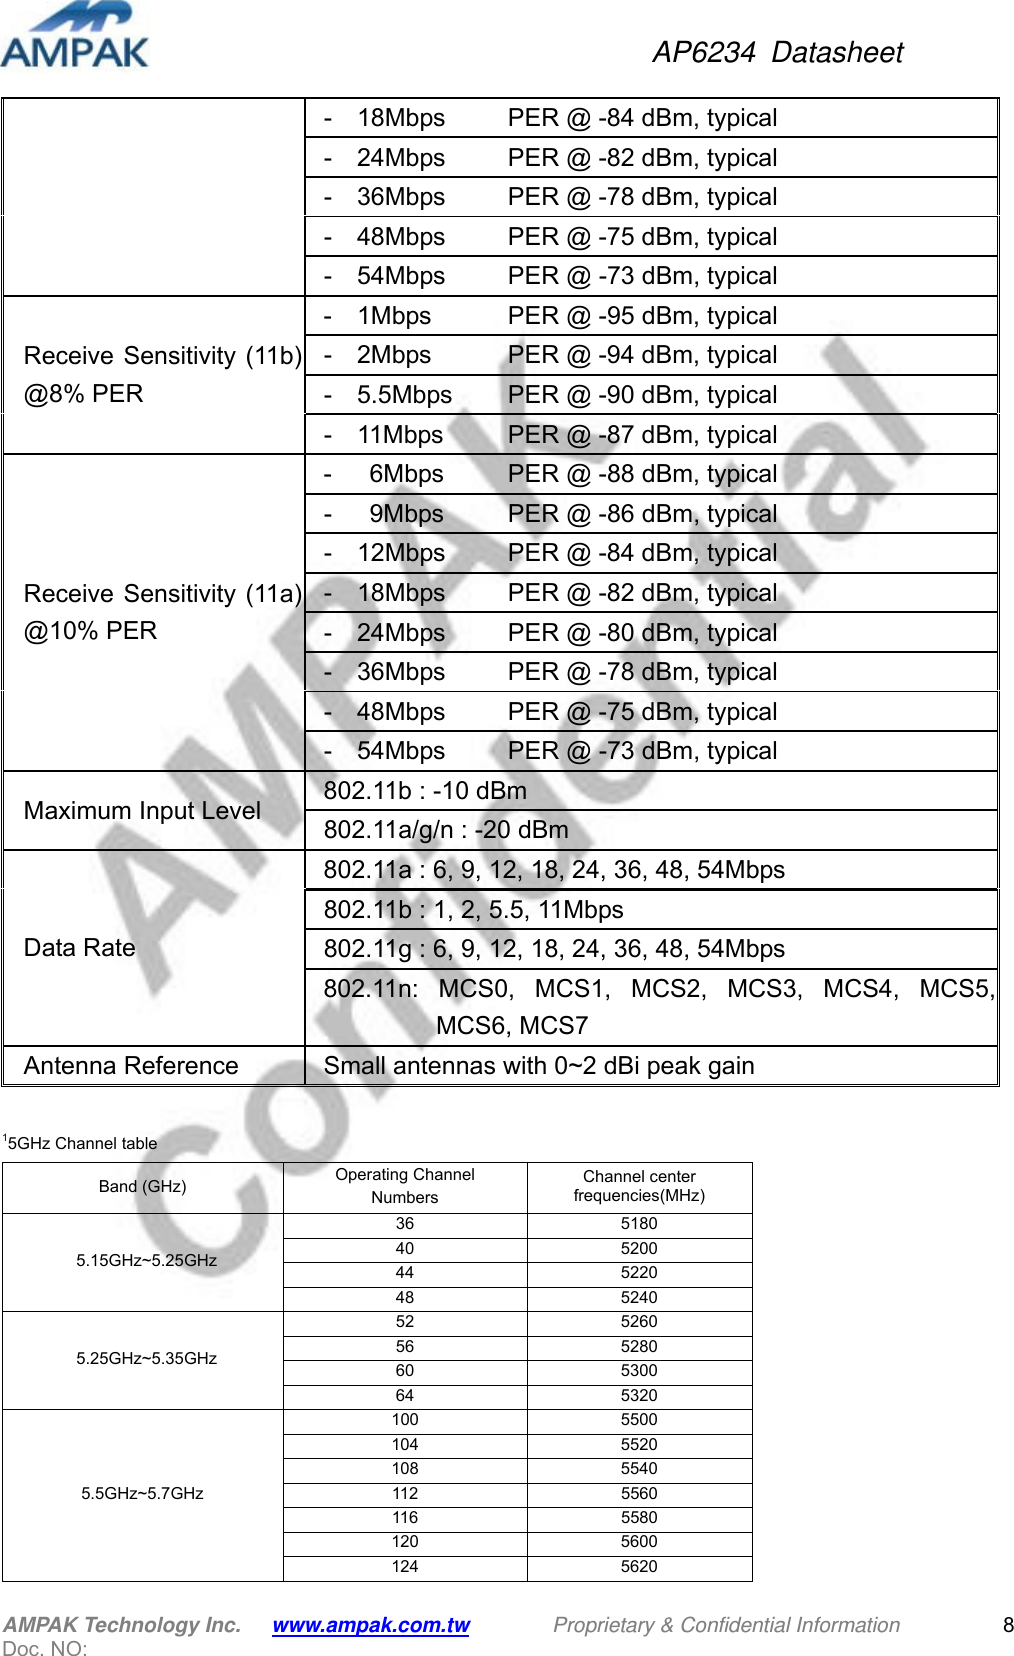 AP6234 Datasheet AMPAK Technology Inc.      www.ampak.com.tw        Proprietary &amp; Confidential Information       Doc. NO:   8-    18Mbps    PER @ -84 dBm, typical -    24Mbps    PER @ -82 dBm, typical -    36Mbps    PER @ -78 dBm, typical -    48Mbps    PER @ -75 dBm, typical -  54Mbps   PER @ -73 dBm, typical Receive Sensitivity (11b) @8% PER -  1Mbps    PER @ -95 dBm, typical -    2Mbps    PER @ -94 dBm, typical -    5.5Mbps   PER @ -90 dBm, typical -    11Mbps    PER @ -87 dBm, typical Receive Sensitivity (11a) @10% PER -   6Mbps   PER @ -88 dBm, typical -   9Mbps    PER @ -86 dBm, typical -    12Mbps    PER @ -84 dBm, typical -    18Mbps    PER @ -82 dBm, typical -    24Mbps    PER @ -80 dBm, typical -    36Mbps    PER @ -78 dBm, typical -    48Mbps    PER @ -75 dBm, typical -  54Mbps   PER @ -73 dBm, typical Maximum Input Level  802.11b : -10 dBm 802.11a/g/n : -20 dBm Data Rate 802.11a : 6, 9, 12, 18, 24, 36, 48, 54Mbps 802.11b : 1, 2, 5.5, 11Mbps 802.11g : 6, 9, 12, 18, 24, 36, 48, 54Mbps 802.11n: MCS0, MCS1, MCS2, MCS3, MCS4, MCS5, MCS6, MCS7 Antenna Reference  Small antennas with 0~2 dBi peak gain    15GHz Channel table Band (GHz)  Operating Channel Numbers Channel center frequencies(MHz)  5.15GHz~5.25GHz 36 5180 40 5200 44 5220 48 5240  5.25GHz~5.35GHz 52 5260 56 5280 60 5300 64 5320 5.5GHz~5.7GHz 100 5500 104 5520 108 5540 112 5560 116 5580 120 5600 124 5620 